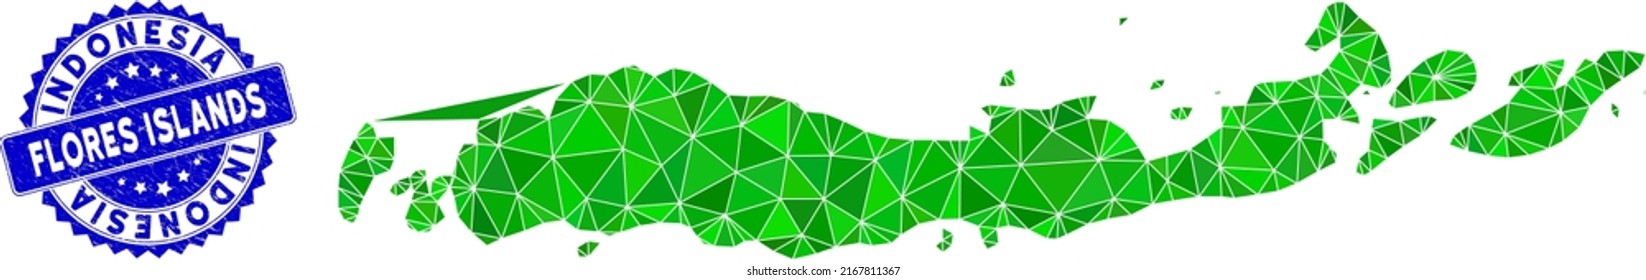 Blue rosette scratched seal and low-poly Flores Islands of Indonesia map mosaic in green colors. Triangulated Flores Islands of Indonesia map polygonal icon illustration, and rubber blue stamp seal.